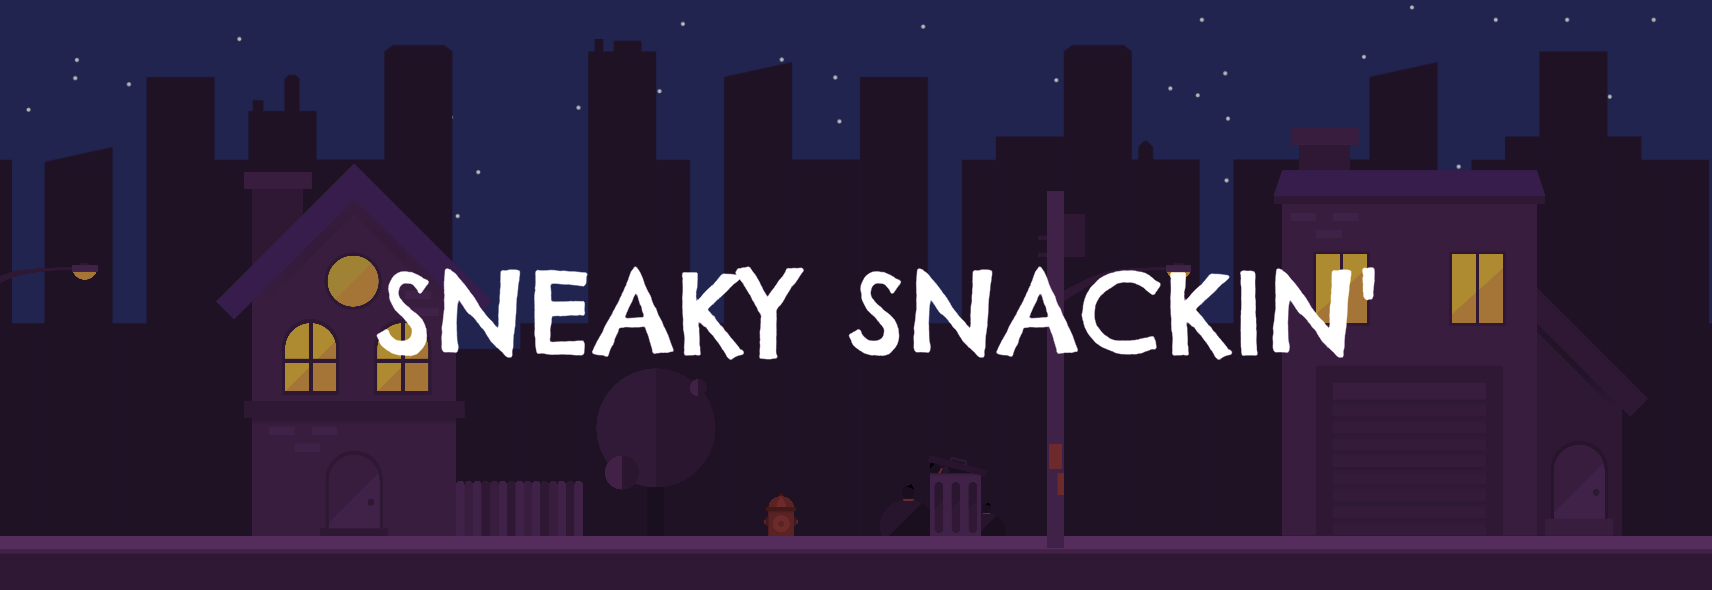 Sneaky Snackin'